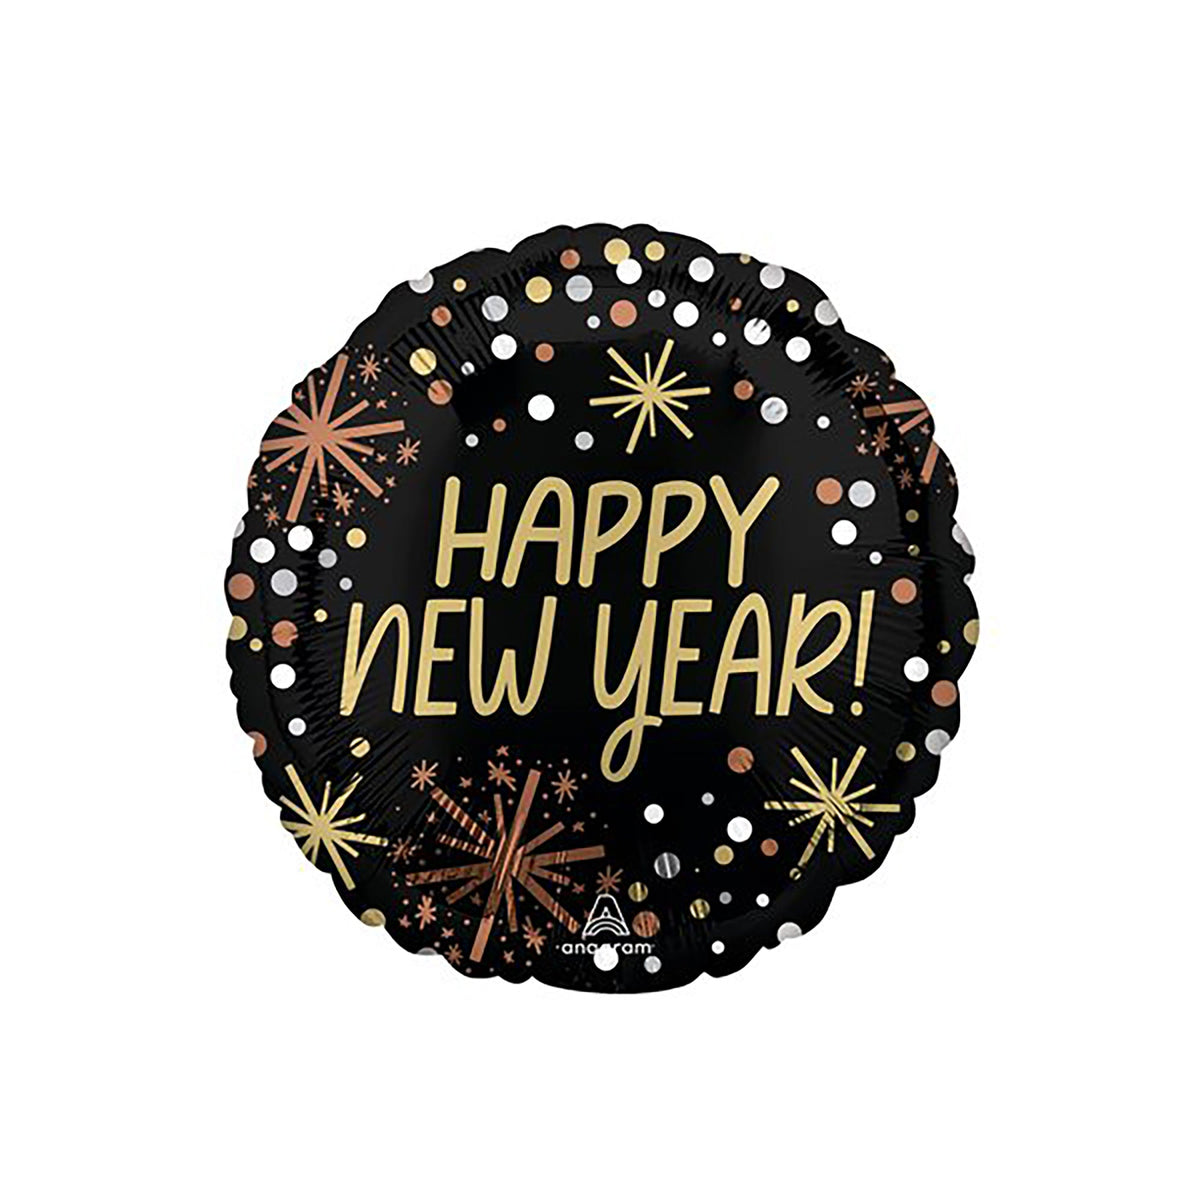 LE GROUPE BLC INTL INC Balloons Happy New Year Black Round Foil Balloon, 18 Inches, 1 Count 026635461658